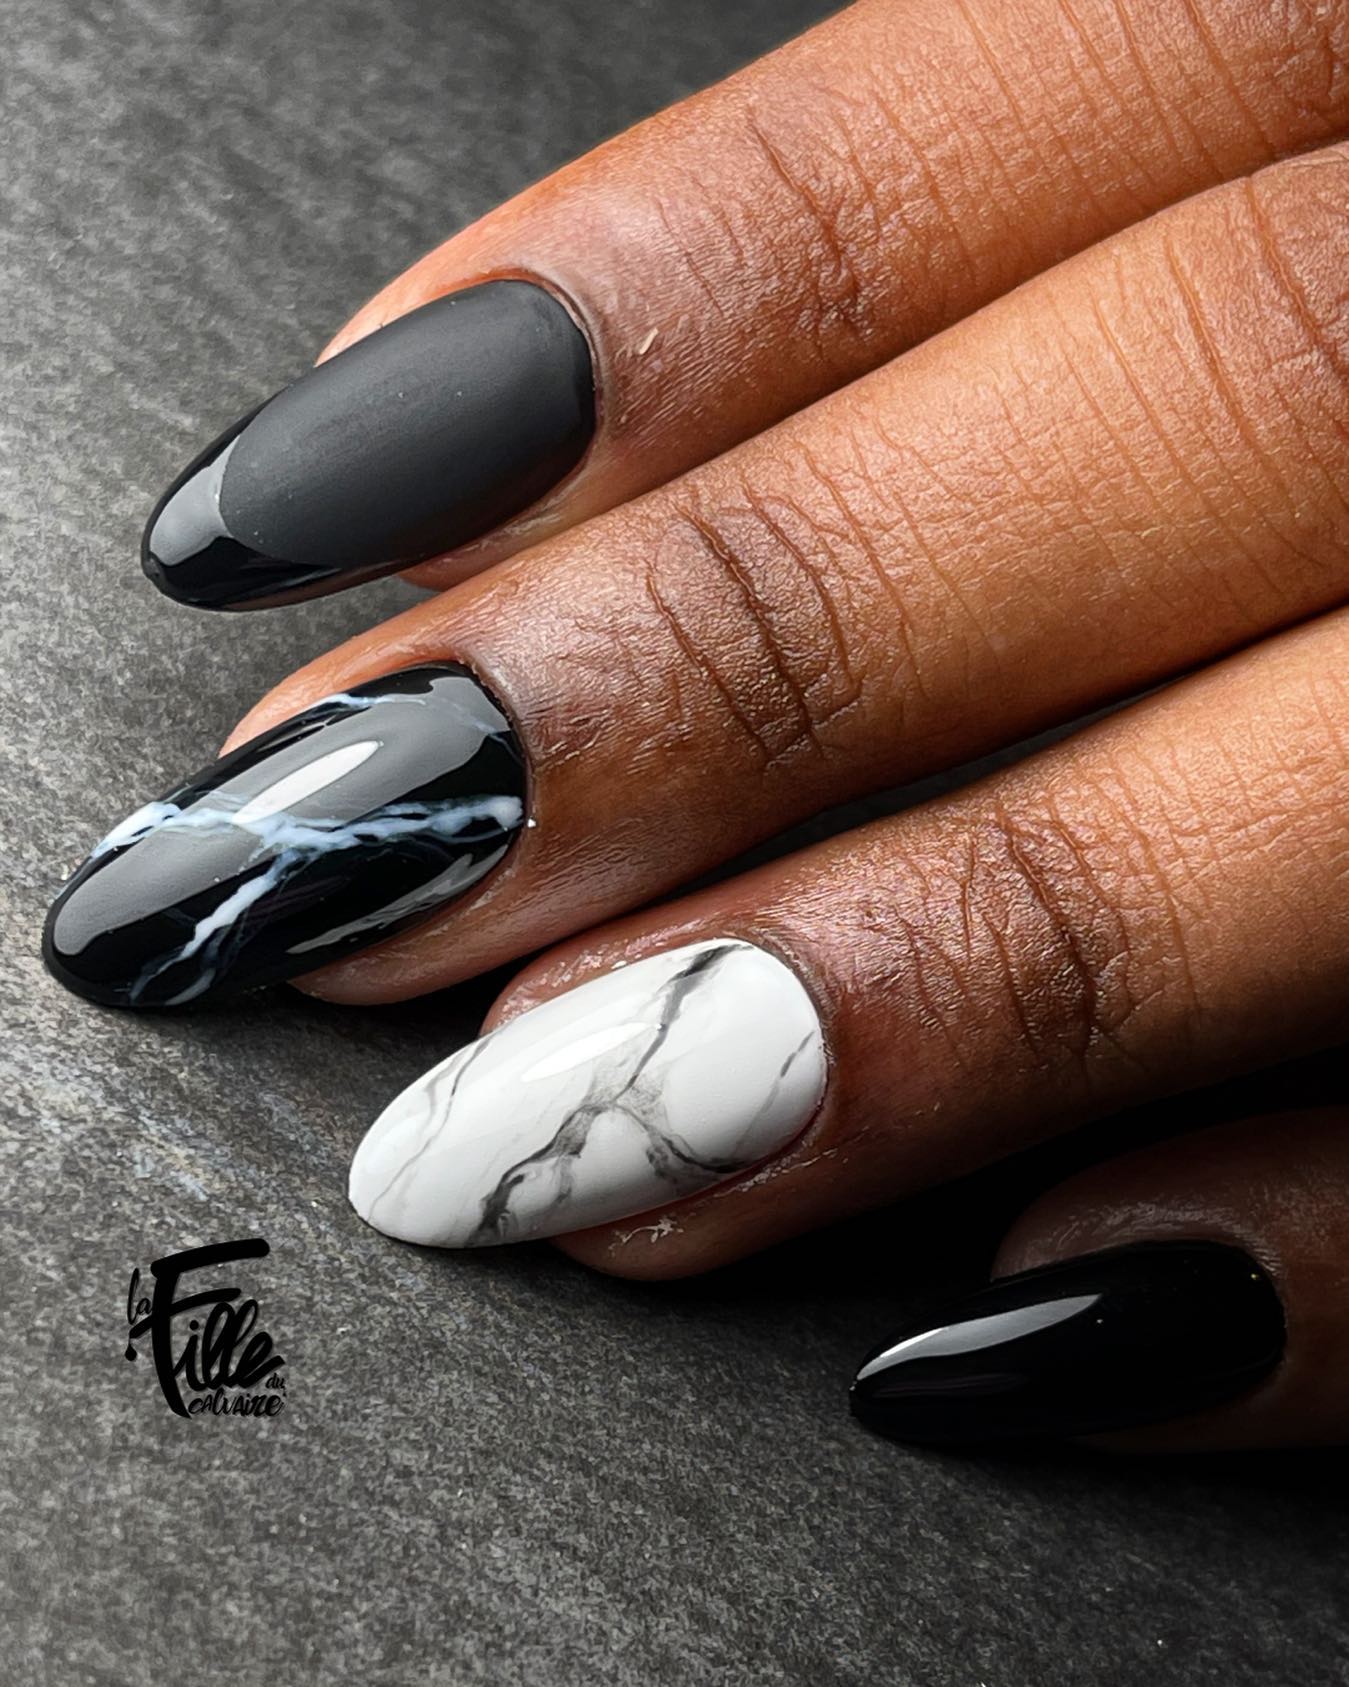 almond-shaped black and white marble nails | Black and white nail art, Black  and white nail designs, White nail designs